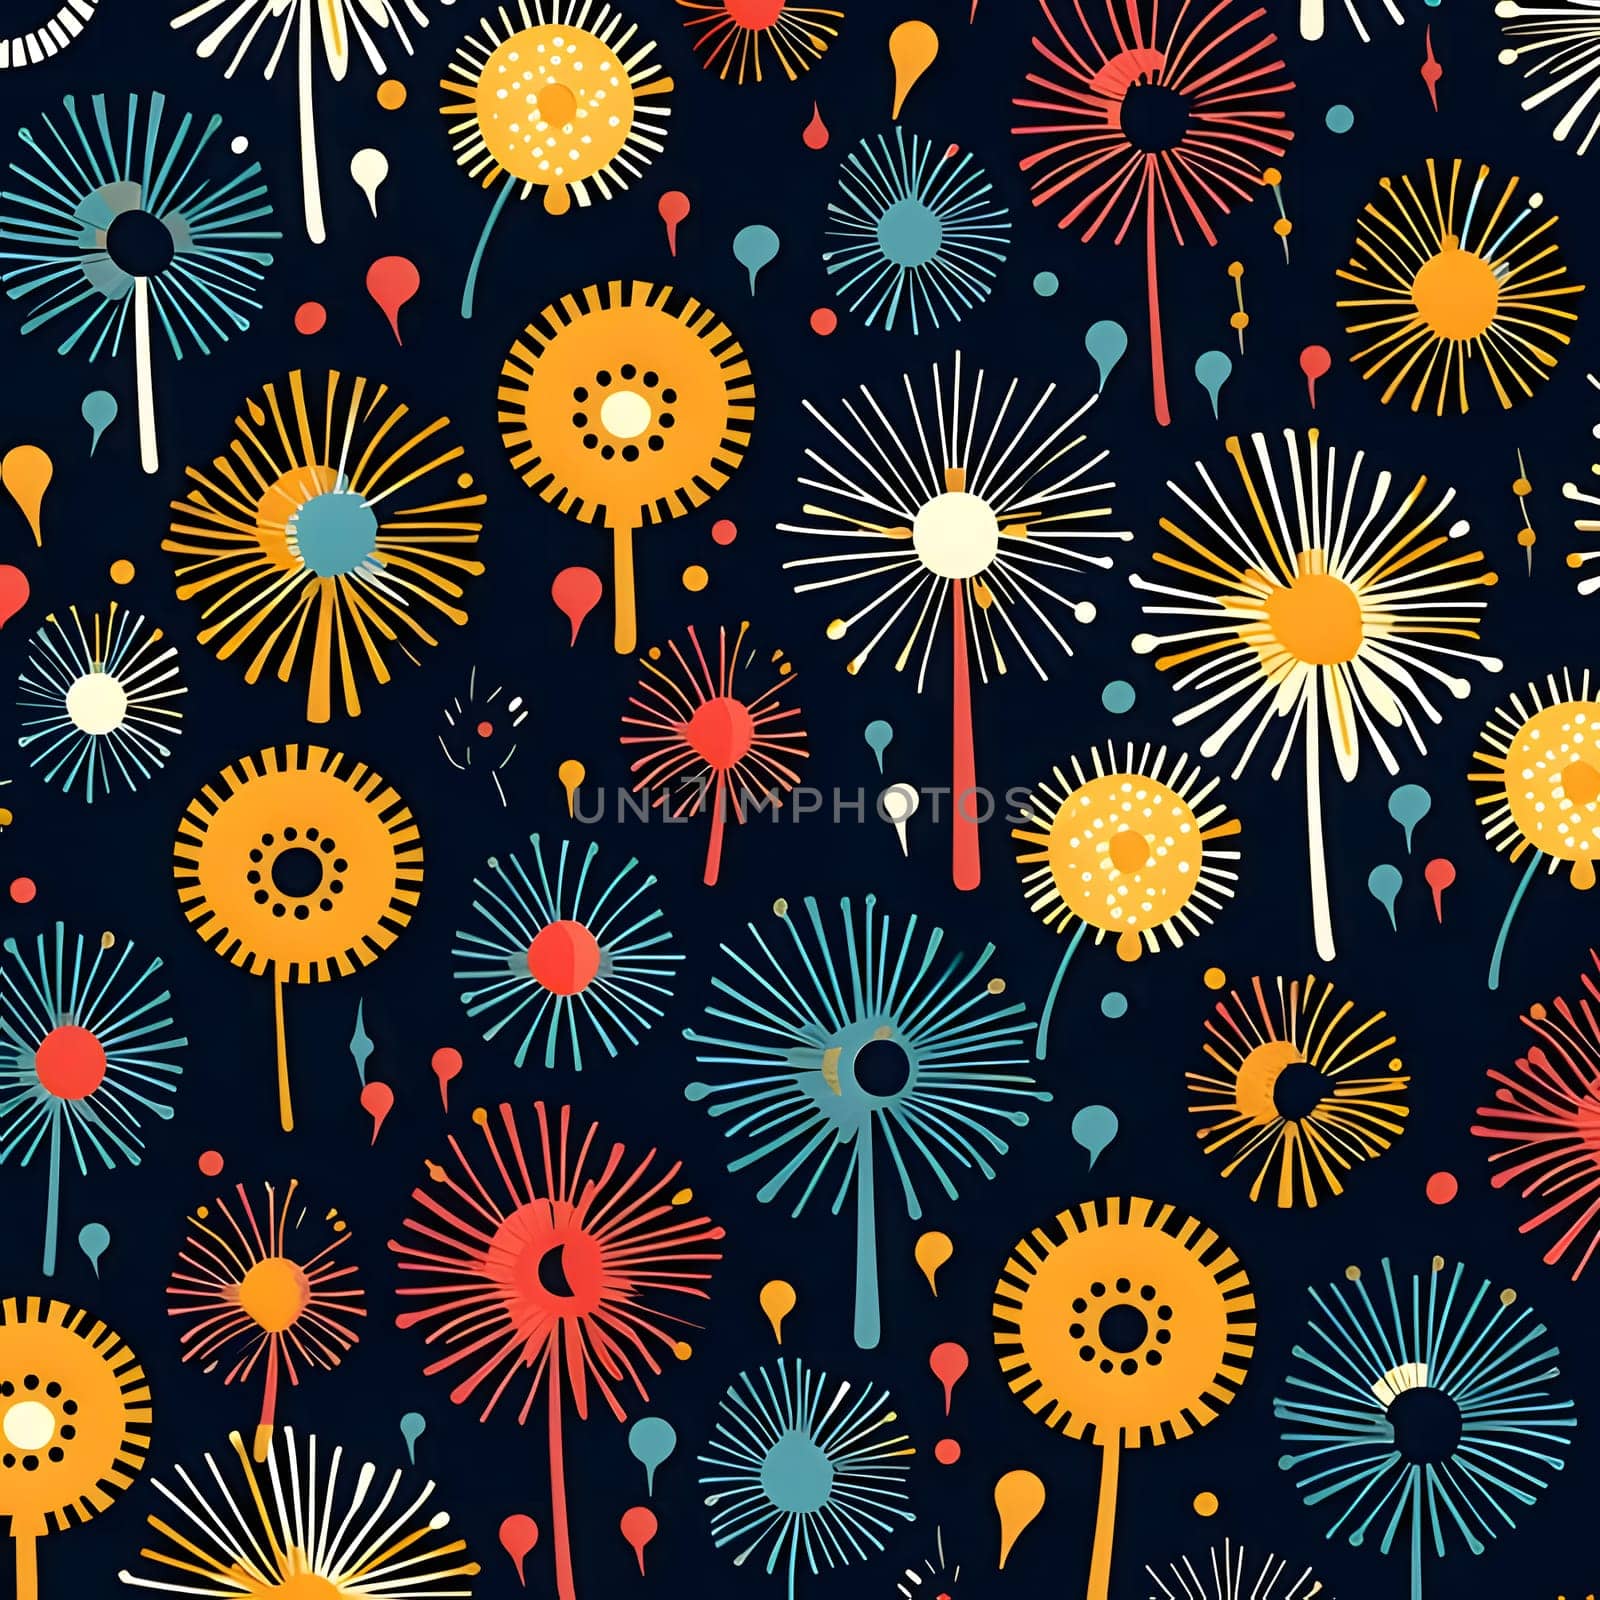 Patterns and banners backgrounds: Seamless pattern with dandelions. Vector illustration in a flat style.